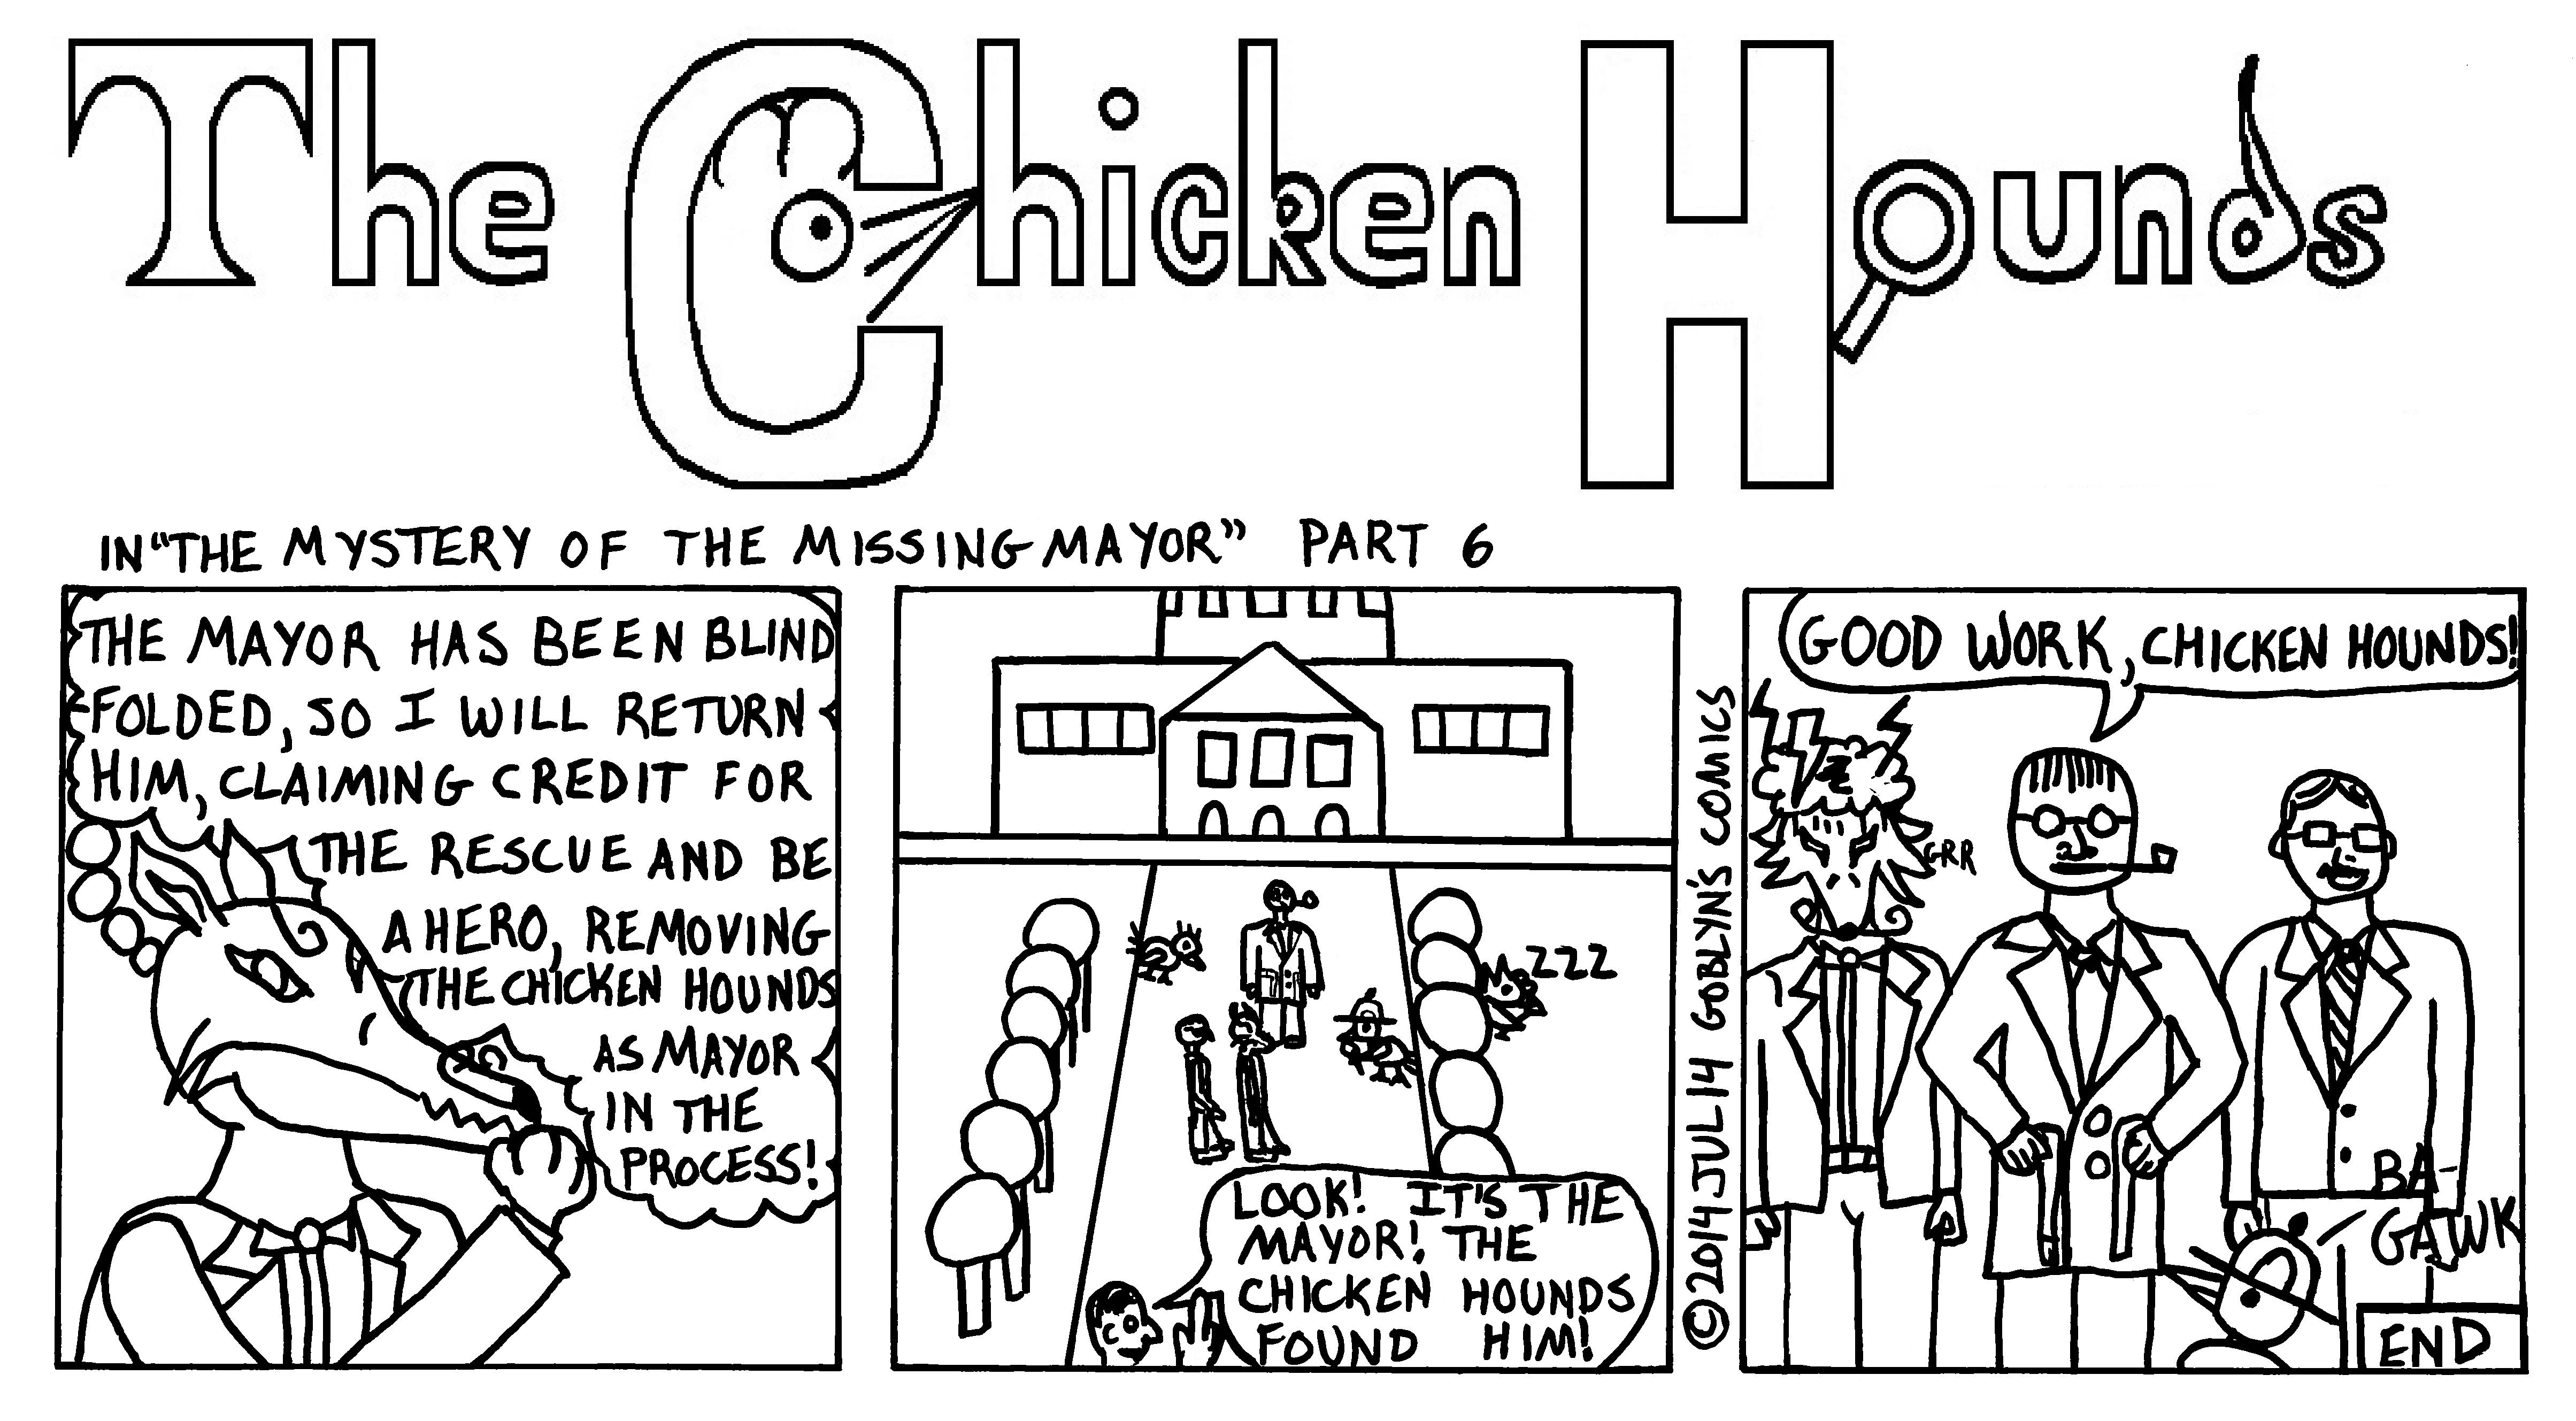 The Chicken Hounds in the Mystery of the Missing Mayor Part 6: Francisco Fox's plans come to an end.